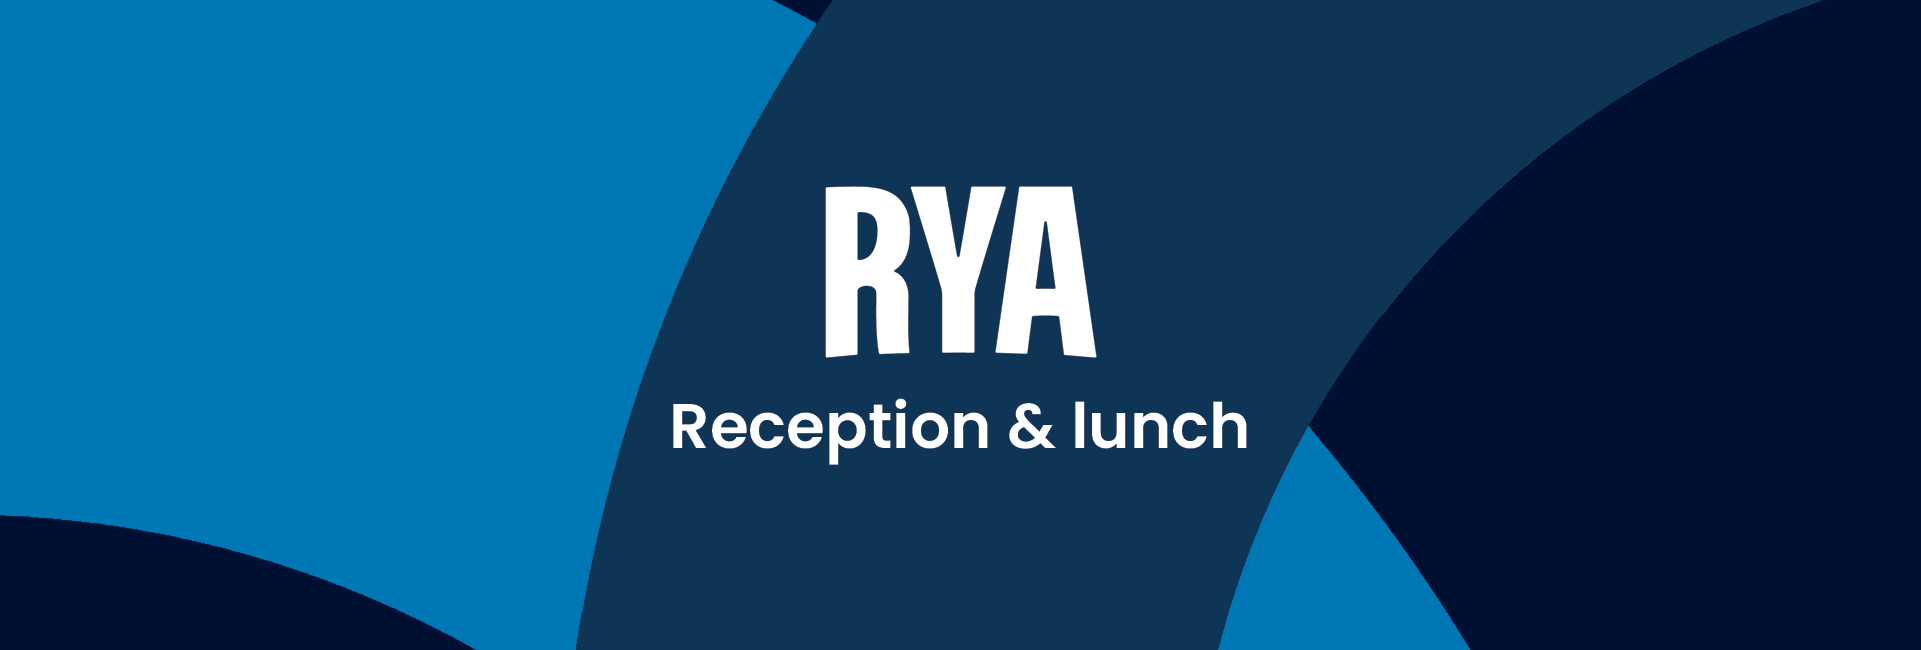 welcome to Royal yachting association reception and lunch